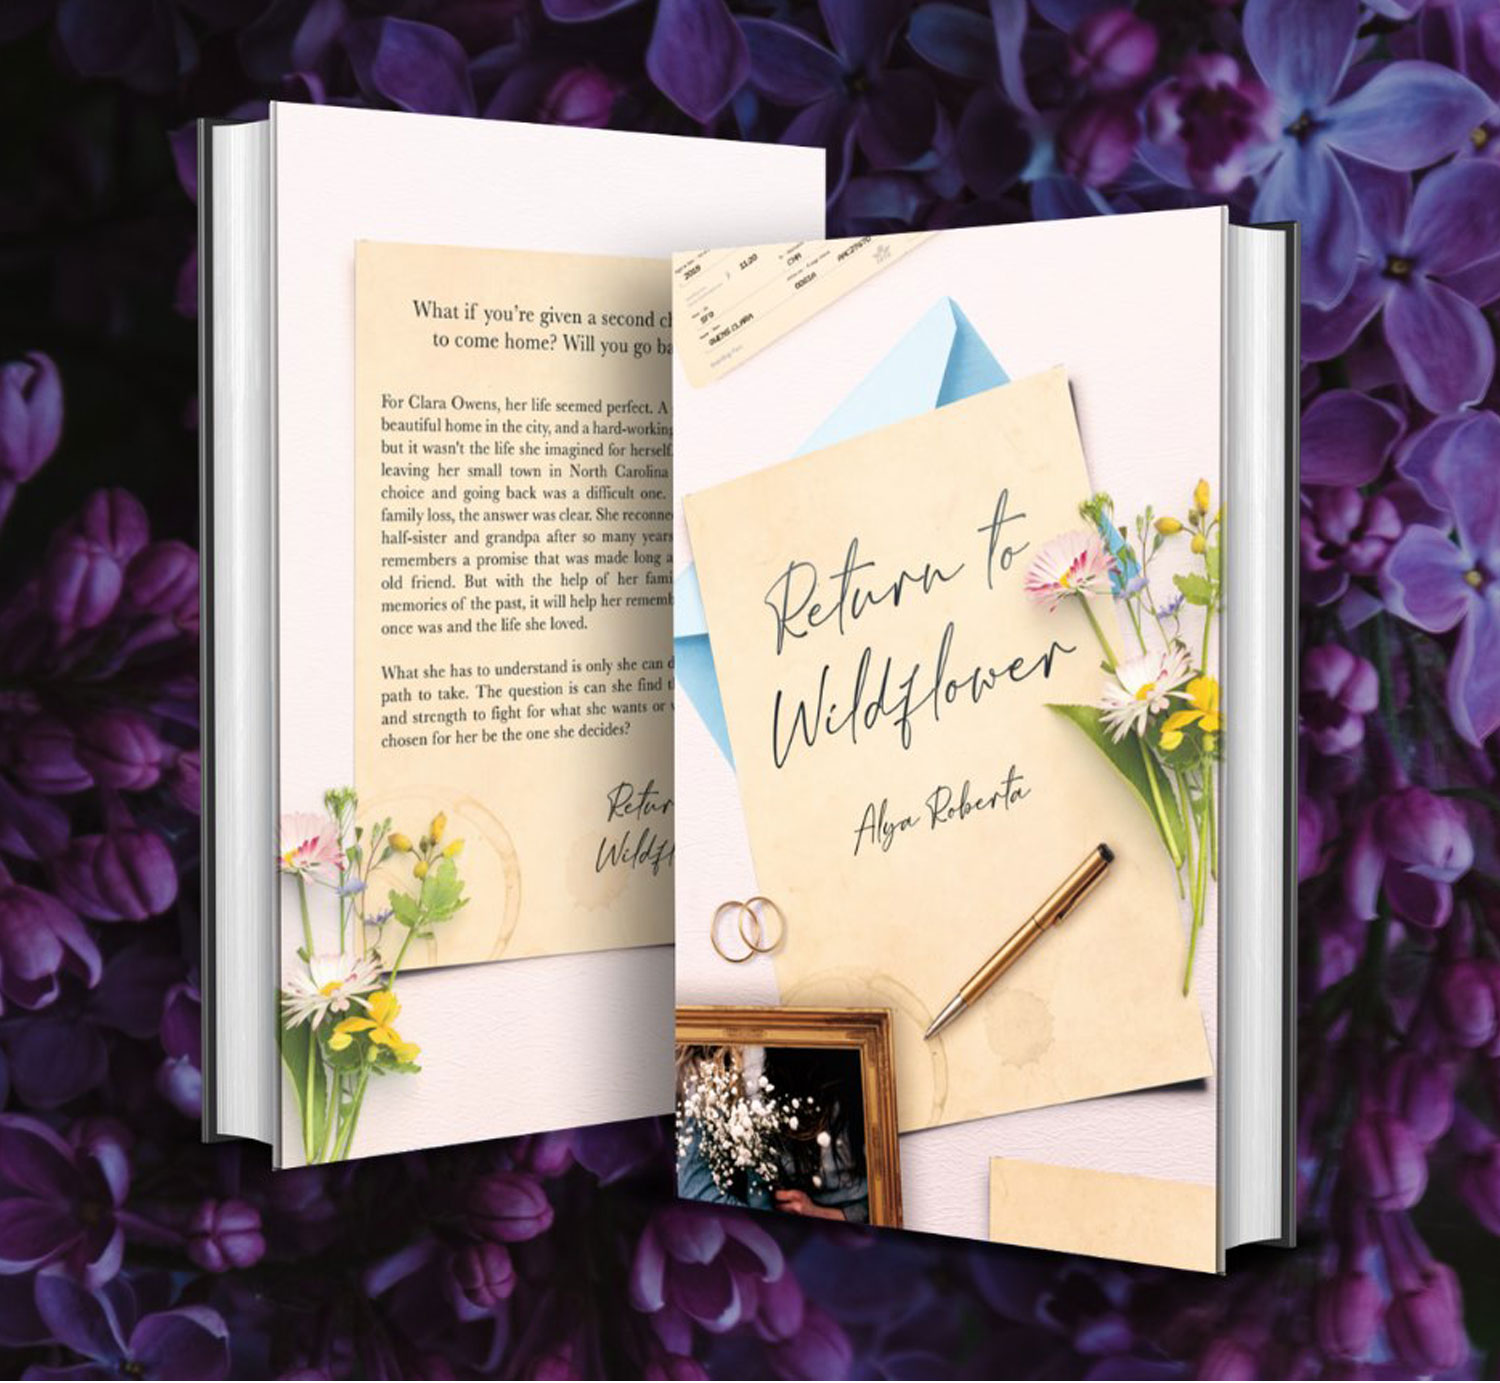 Return to Wildflower cover design